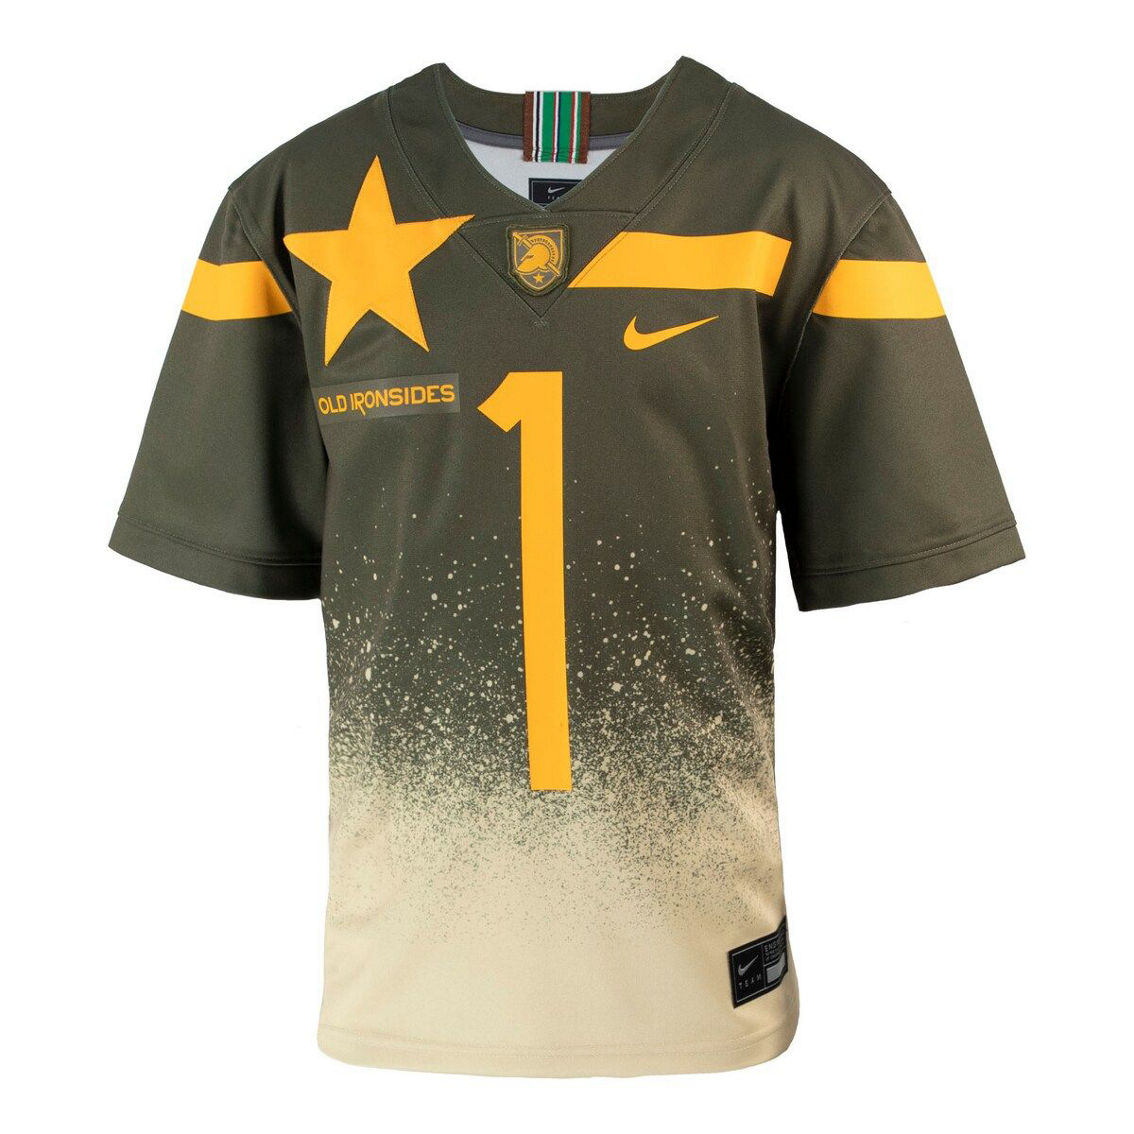 Nike Youth #19 Olive Army Black Knights 1st Armored Division Old Ironsides Untouchable Football Jersey - Image 3 of 4